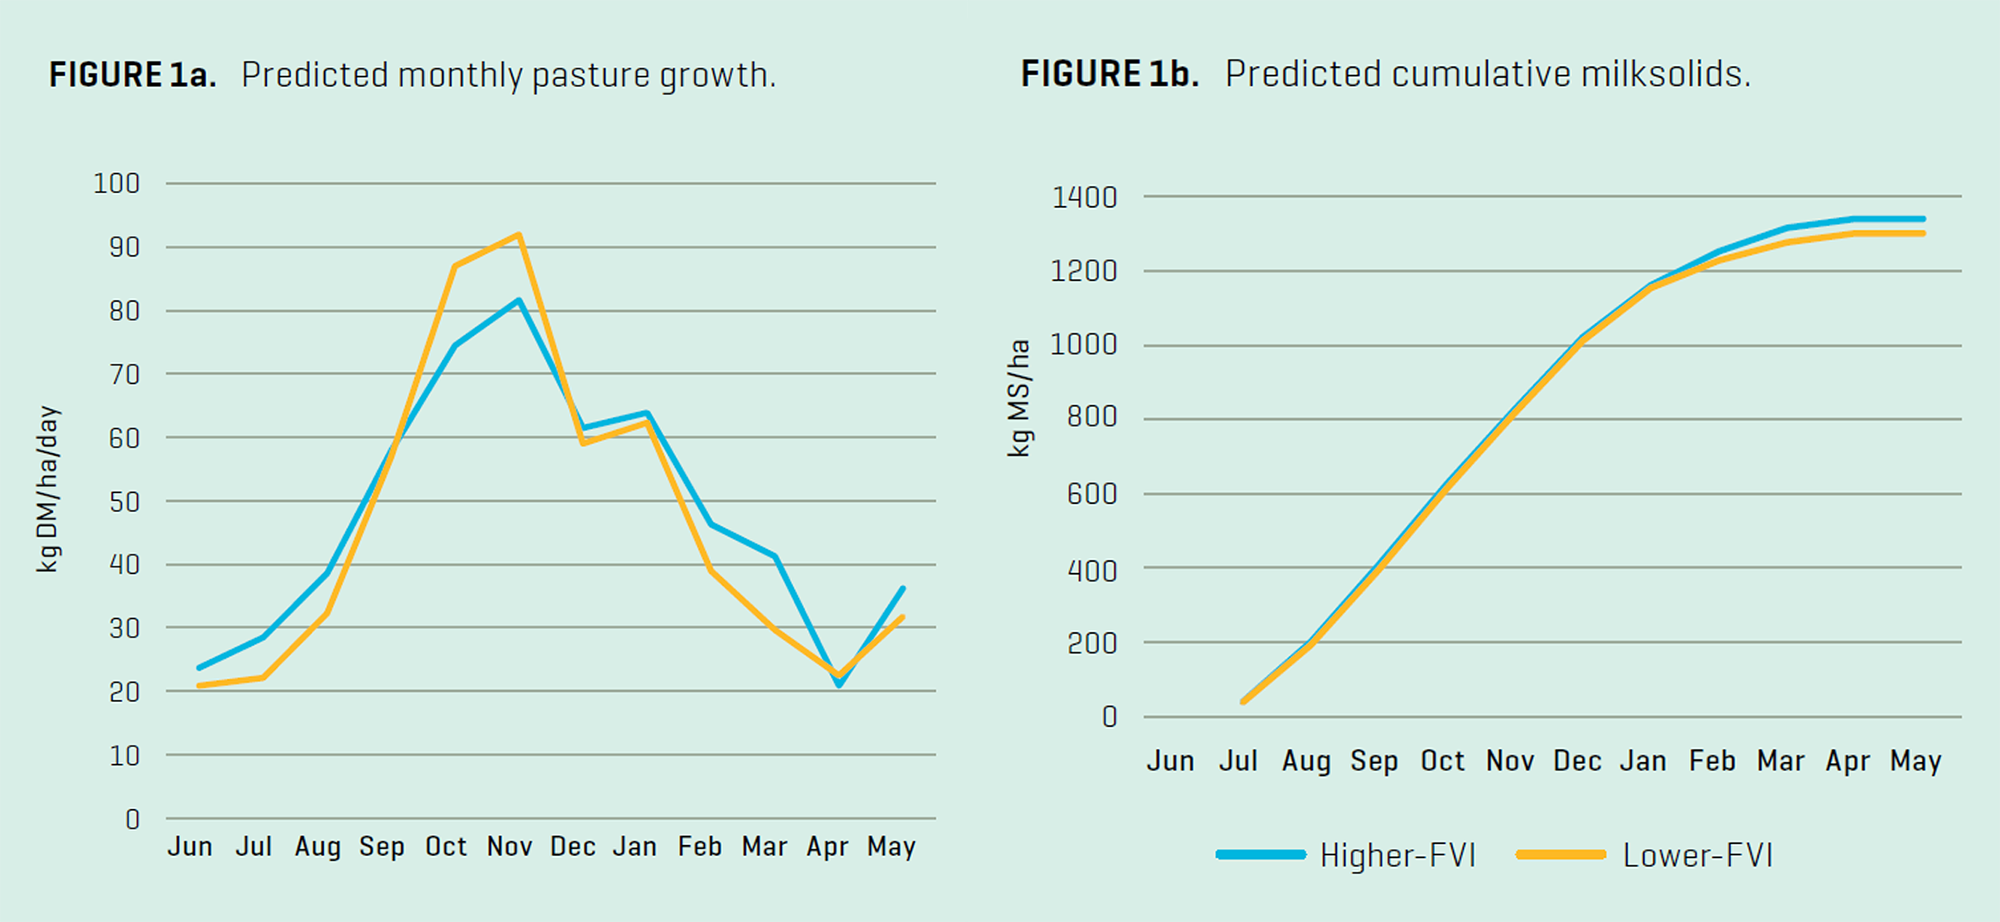 Predicted pasture growth and cumulative milksolids graph